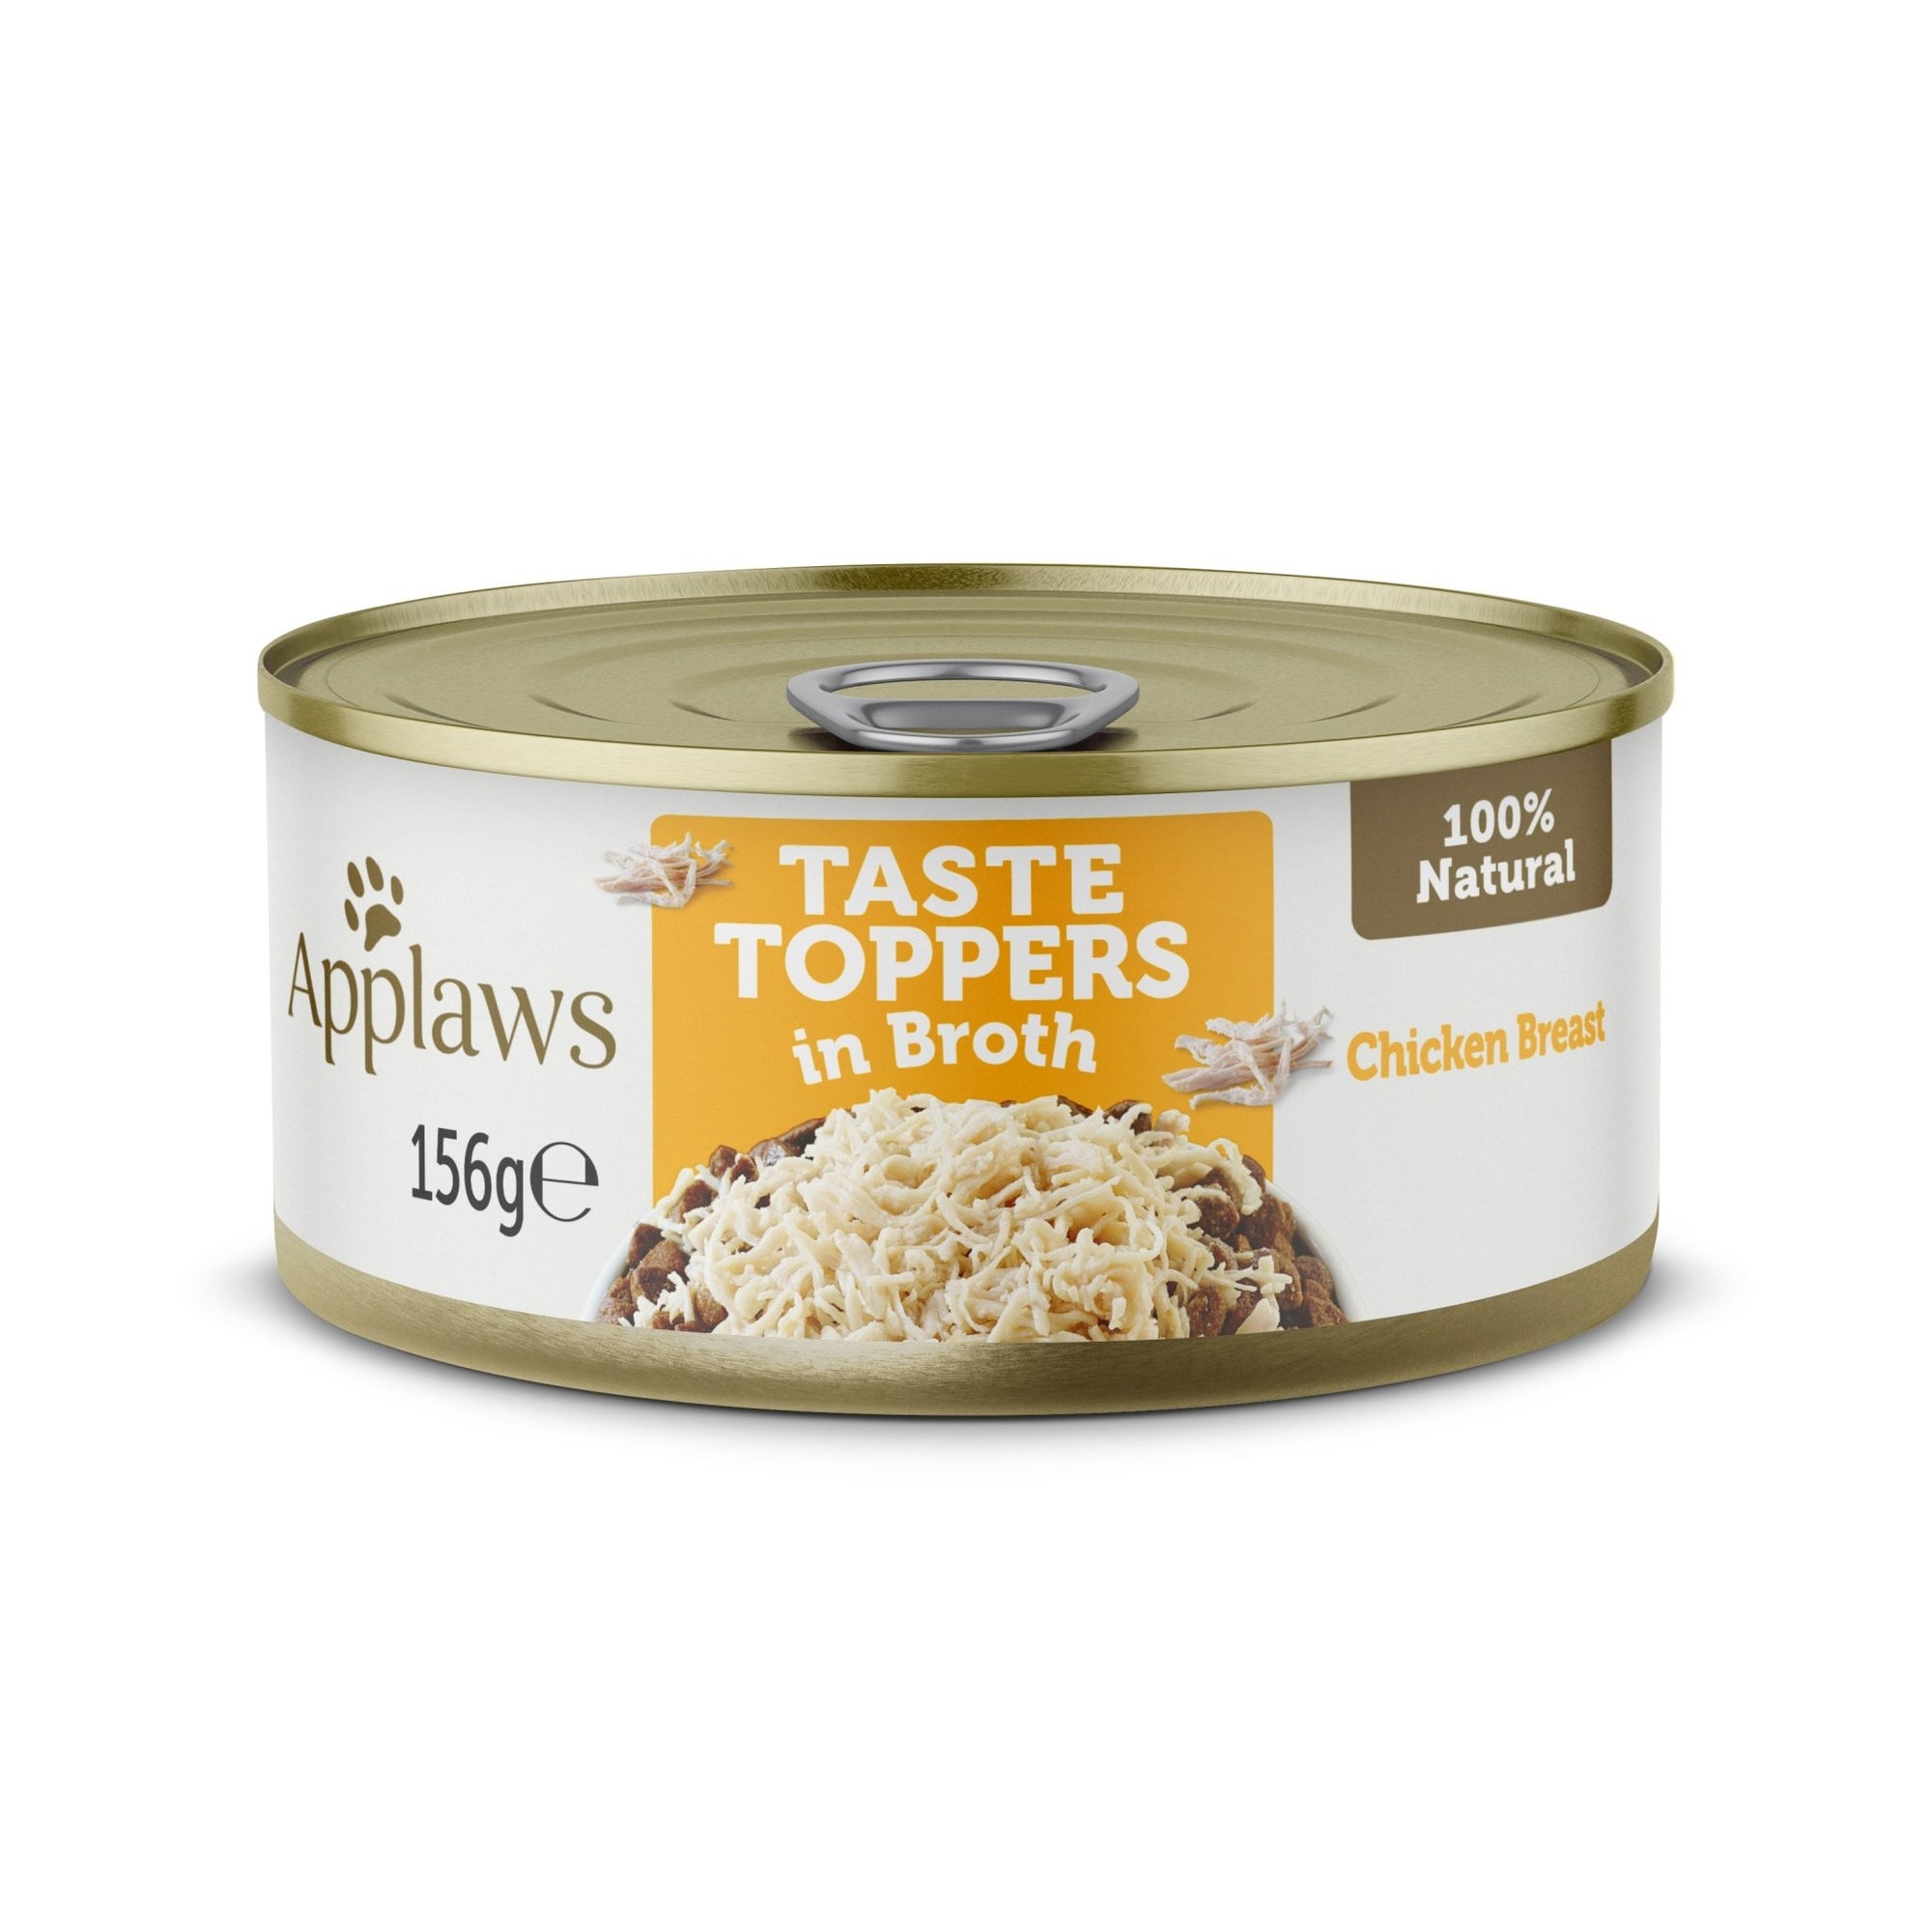 Applaws Taste Toppers Chicken Breast with Rice Tin 12x156g, Applaws,